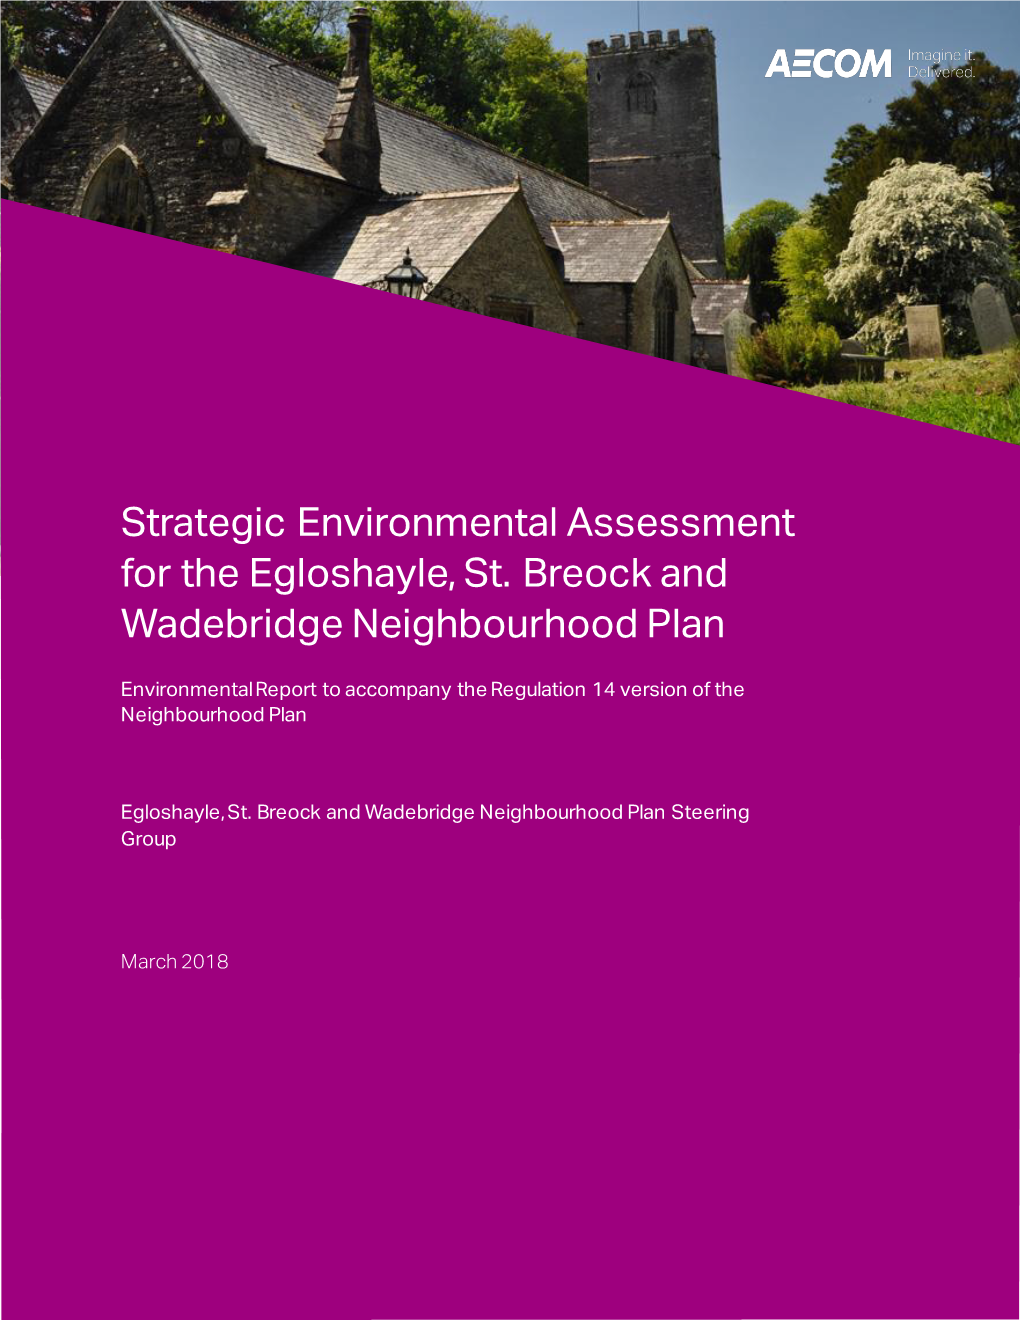 To Download the Strategic Environmental Assessment